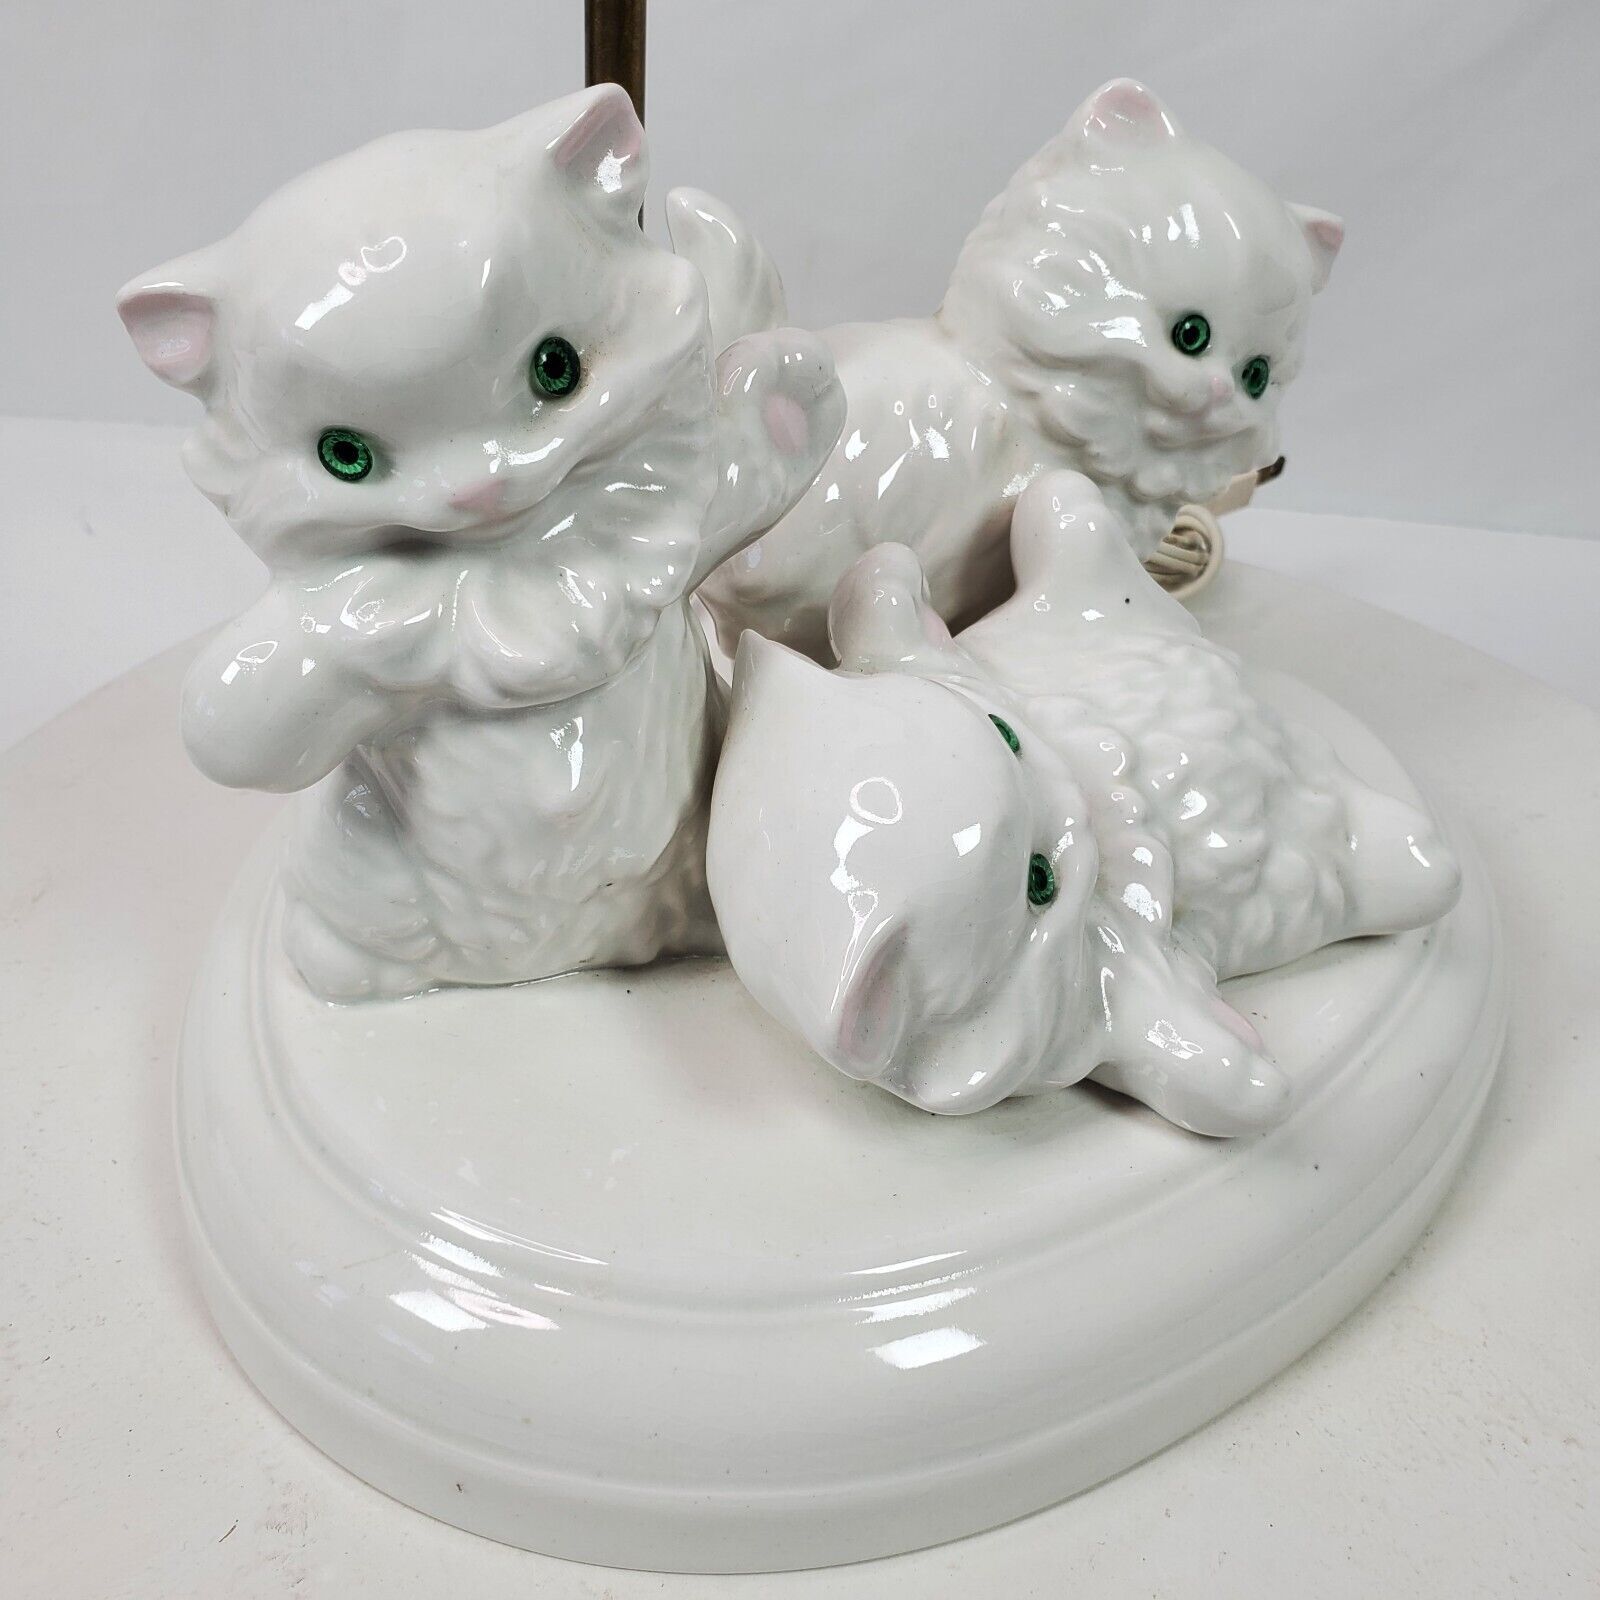 Vintage White Persian Cat Table Lamp 3 Kittens w/ Green Eyes Holland Mold